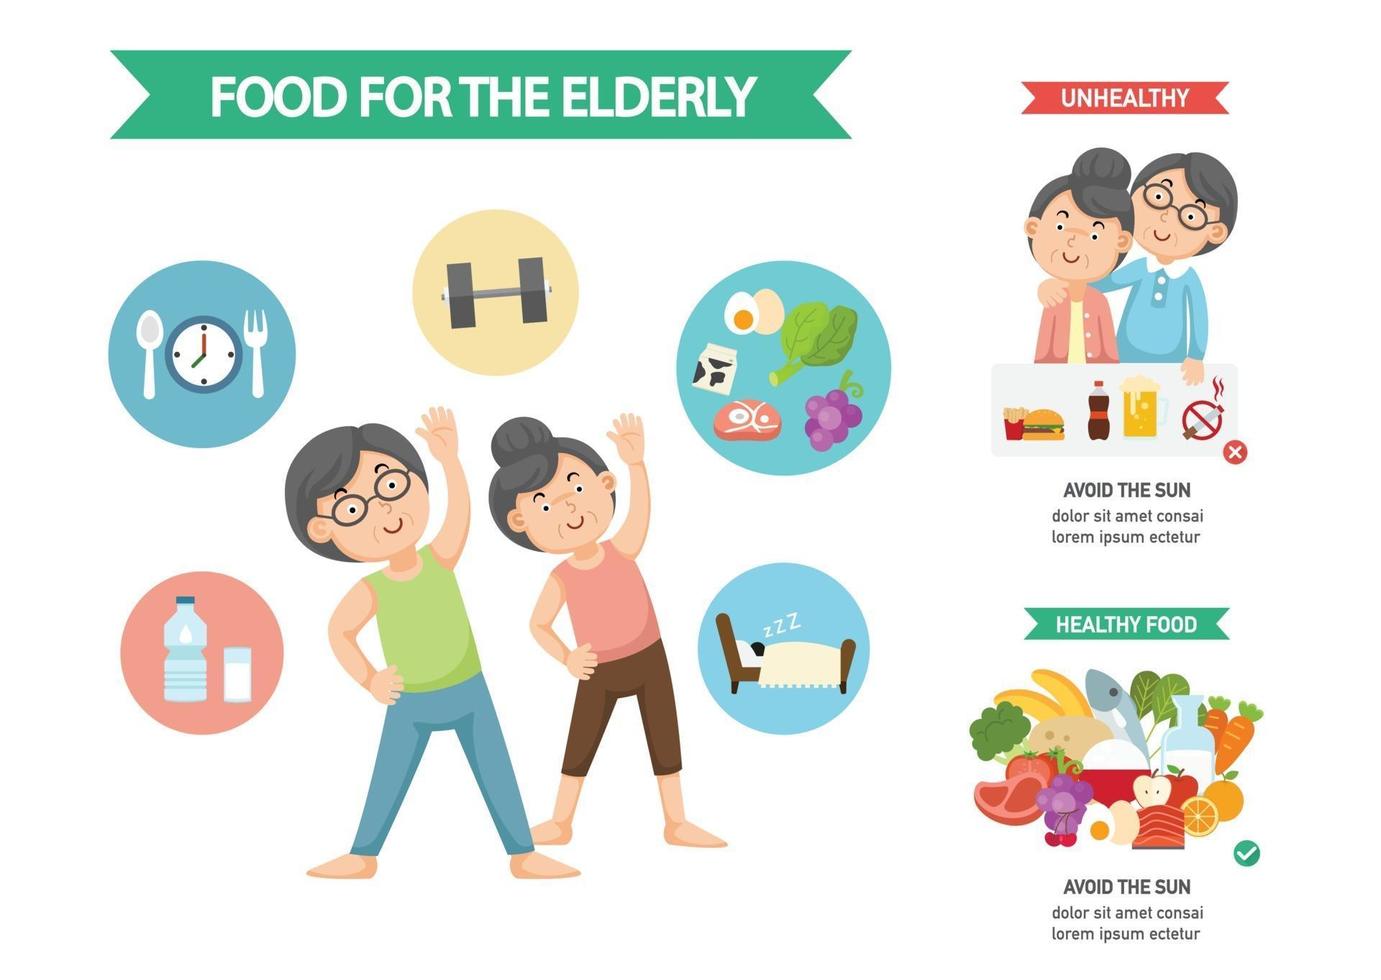 Food for the elderly infographic,vector illustration vector